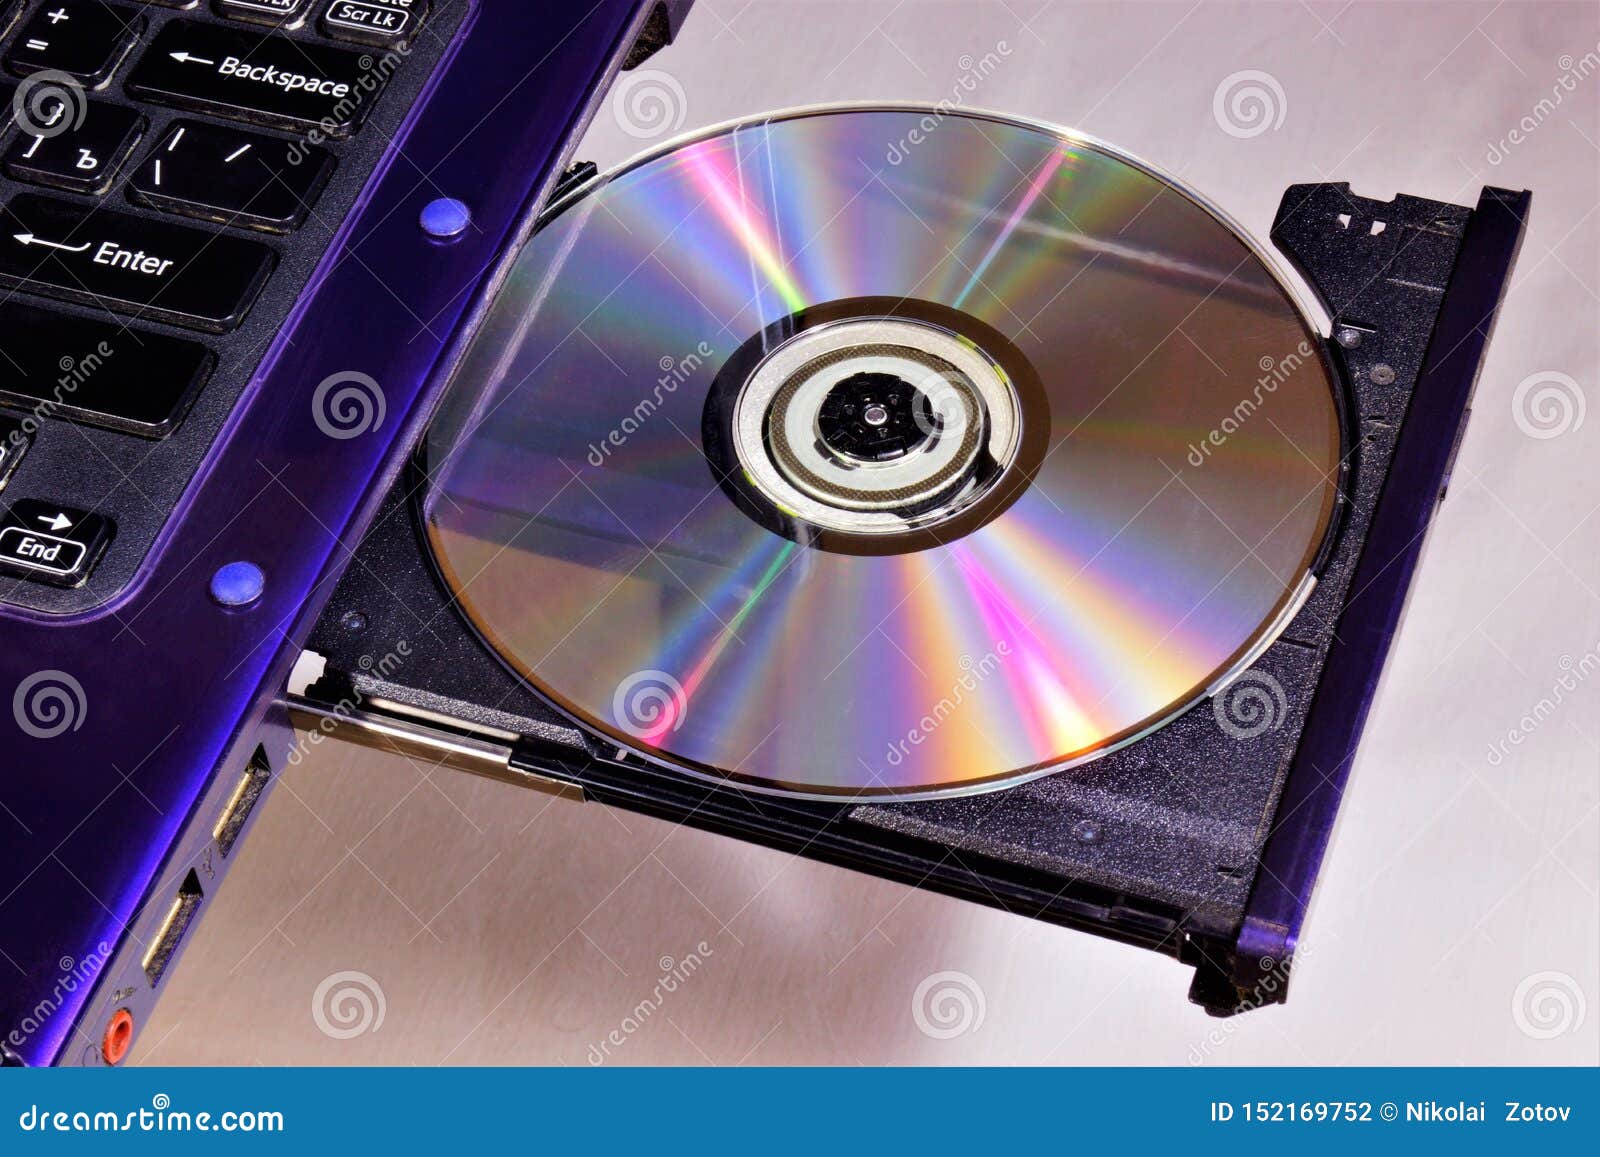 Cd Or Dvd In The Drive Drive Of The Laptop Computer Laptop Portable Portable Personal Computer A Pc Drive Is A Computer Device Stock Photo Image Of Laptop Media